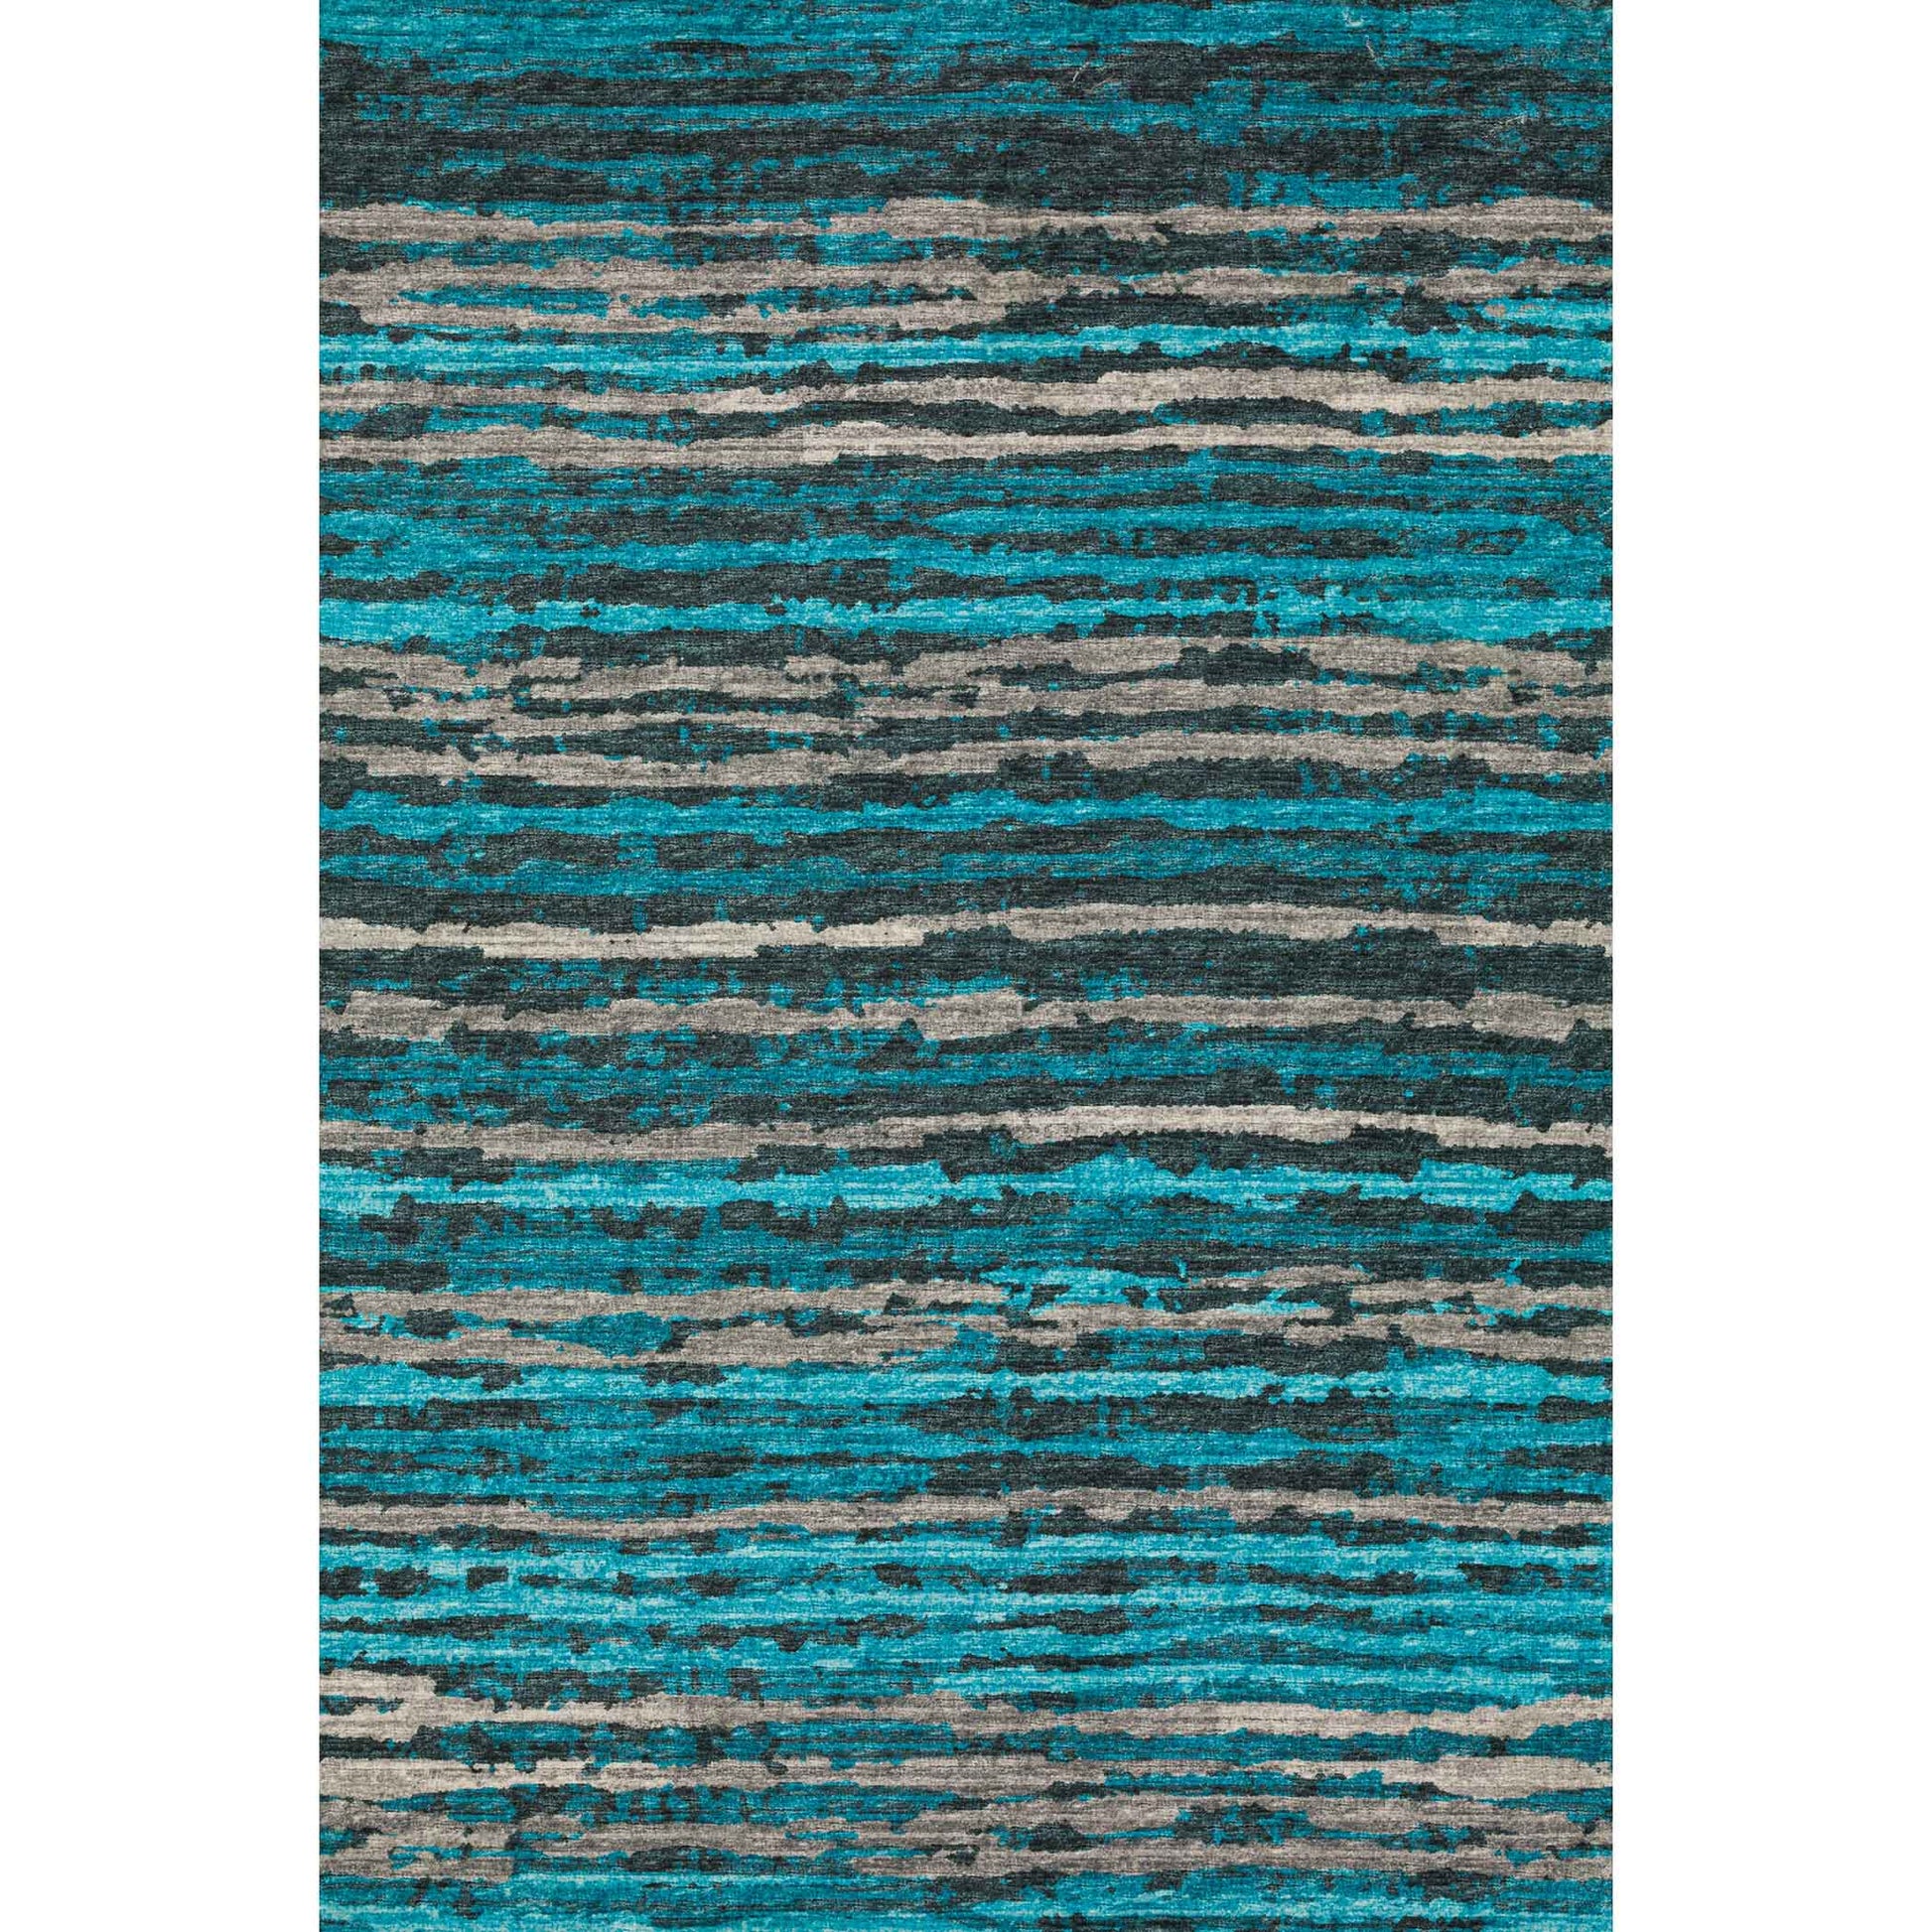 Dalyn Rugs Brisbane BR4 Teal Contemporary Machinemade Rug